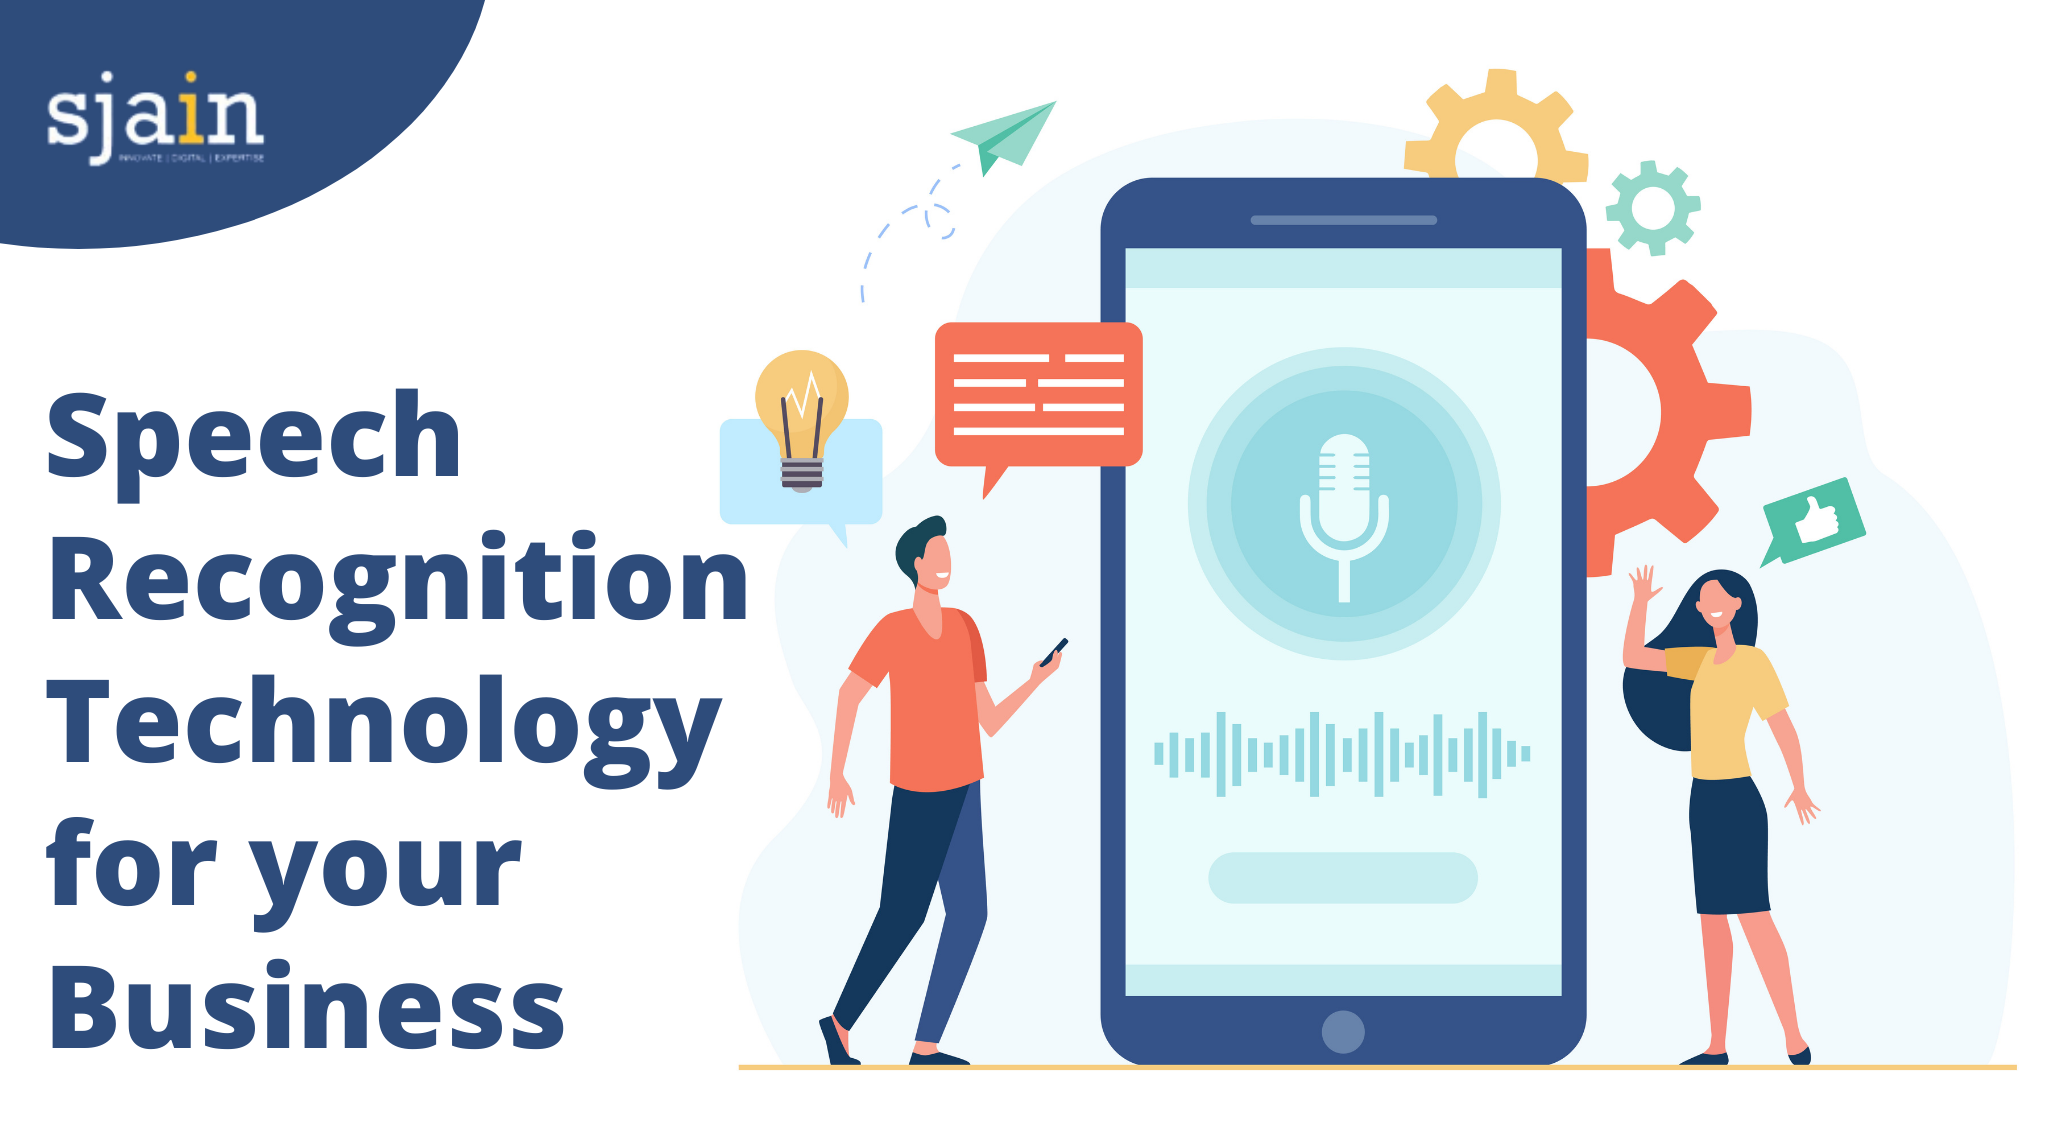 How speech recognition technology can create new opportunities for your business?